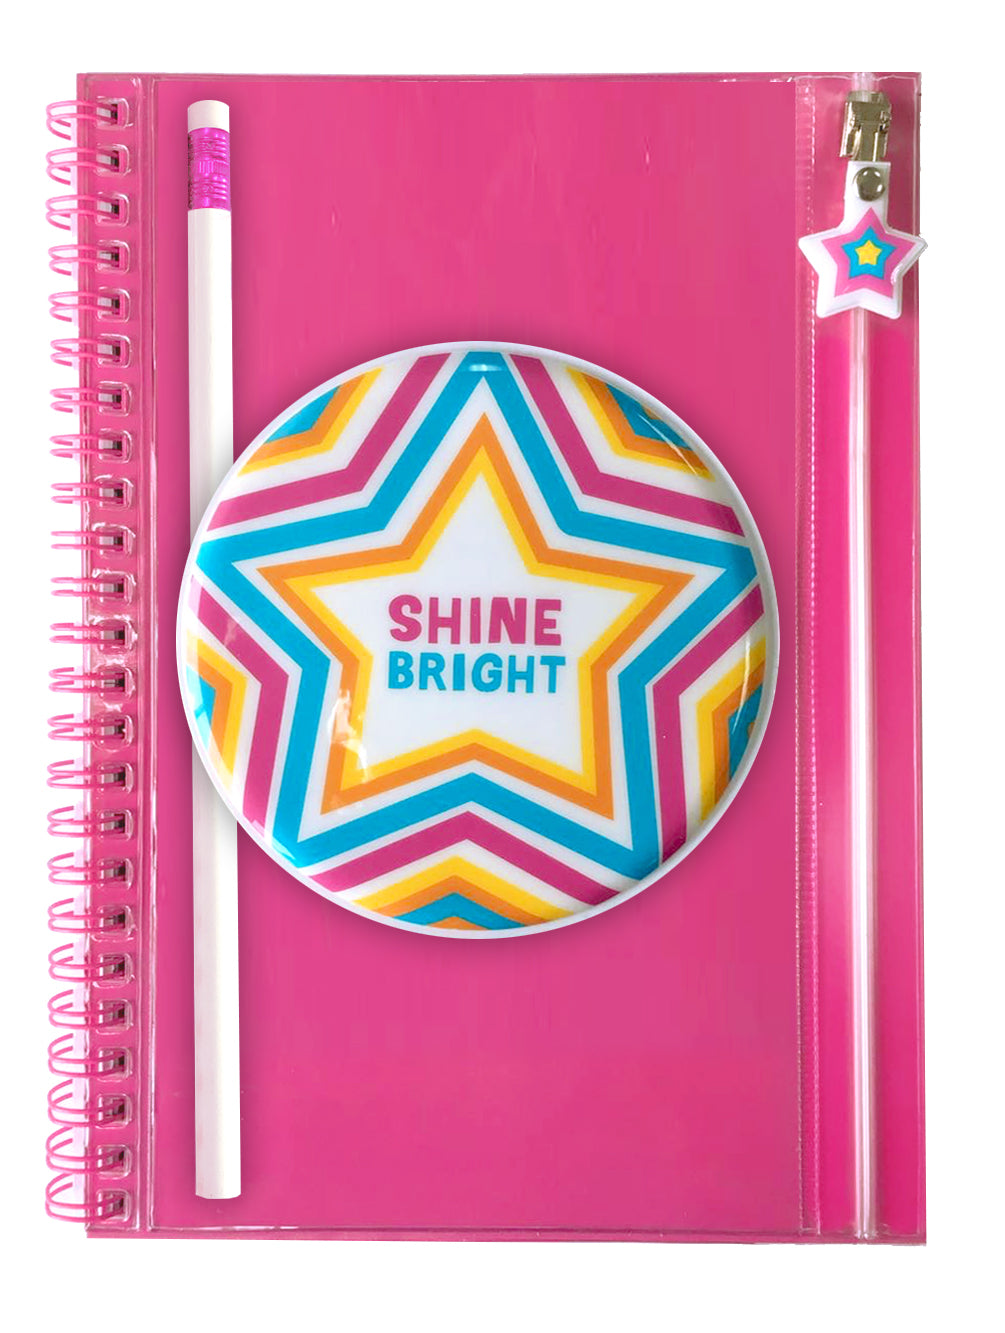 Snifty: Keep it Together Pencil Pouch Journal Set